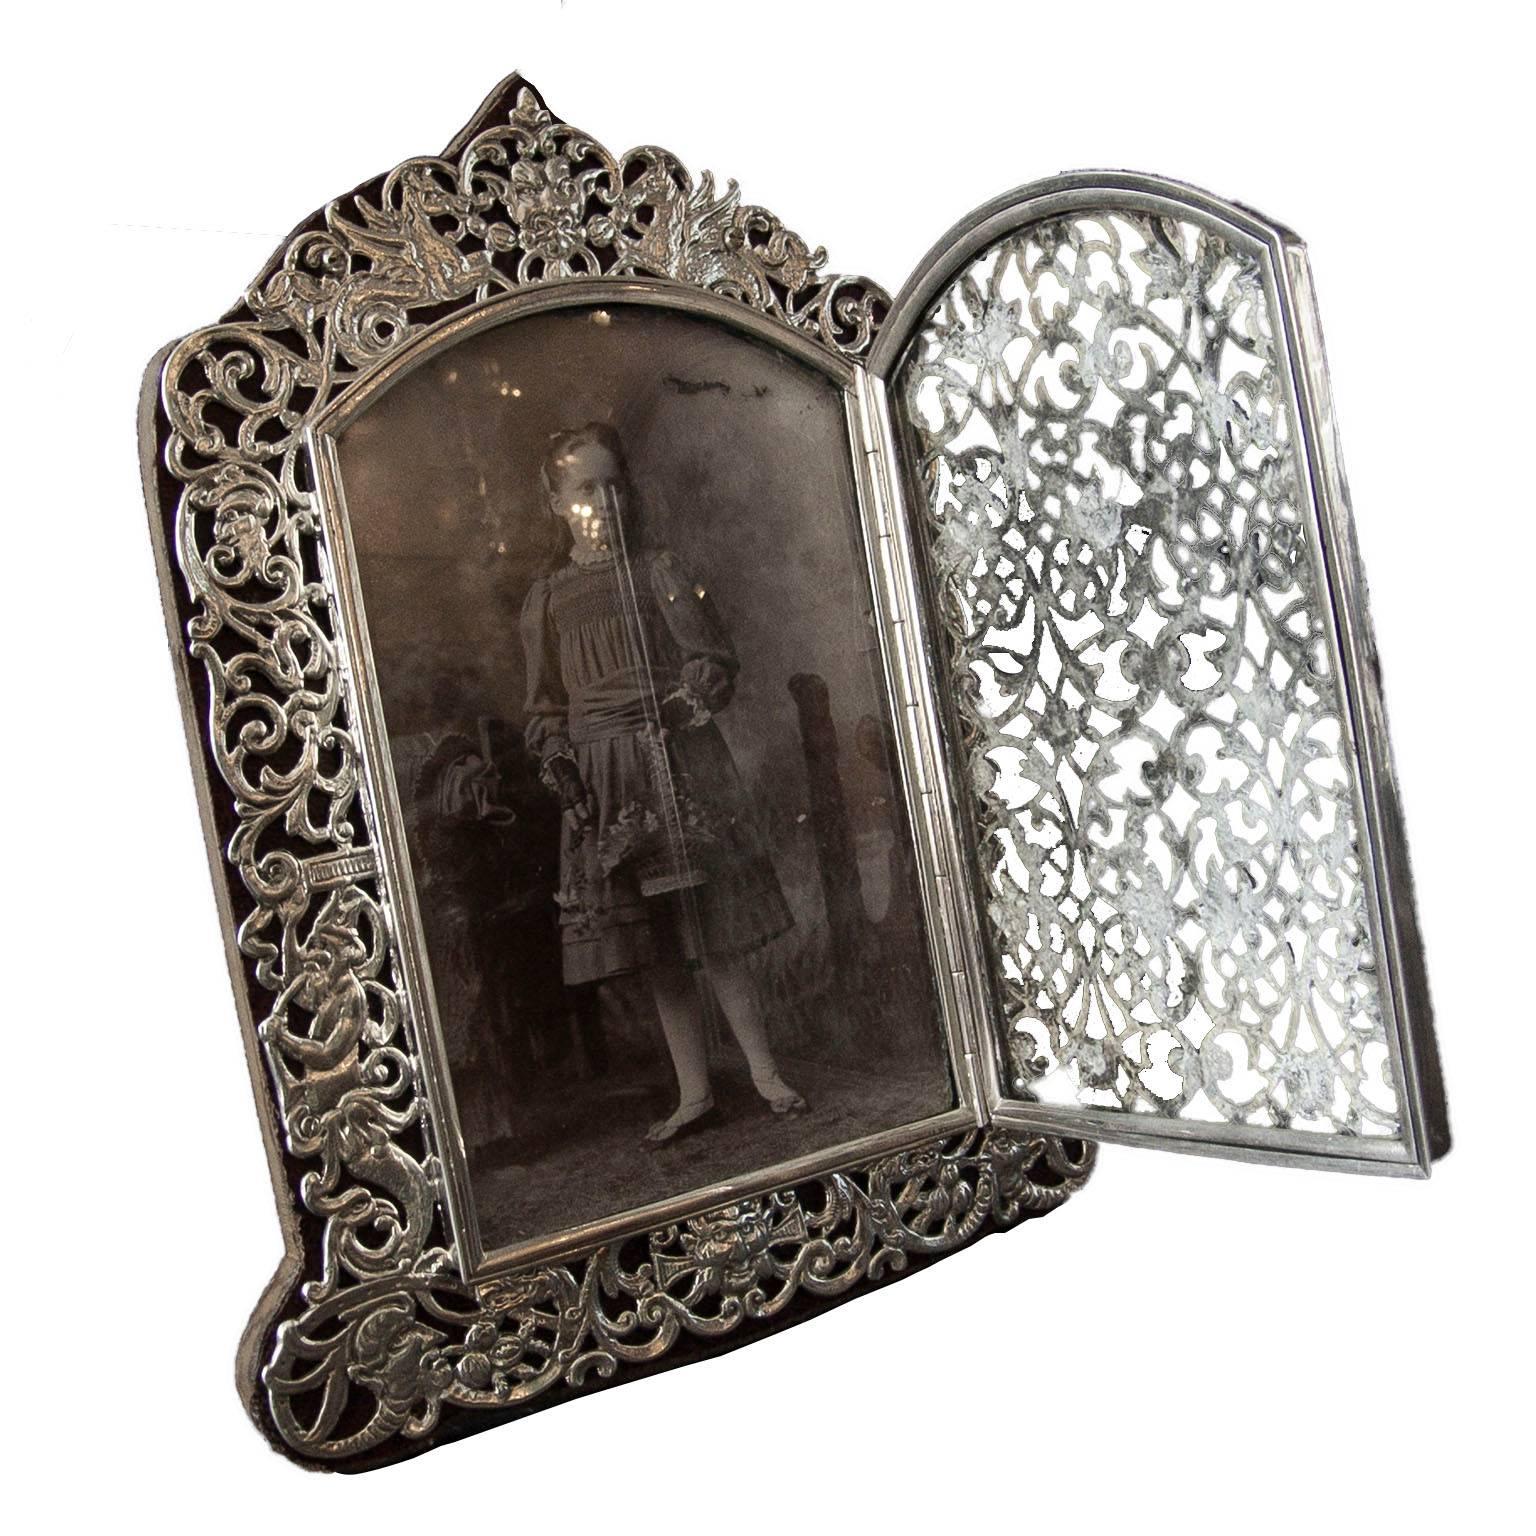 A very rare Victorian sterling silver wonderfully high quality photograph frame with opening aperture and very finely pierced decoration by Judah Rosenthal & Samuel Jacob, London (worked circa 1865-1890).

A decoratively hand pierced silver